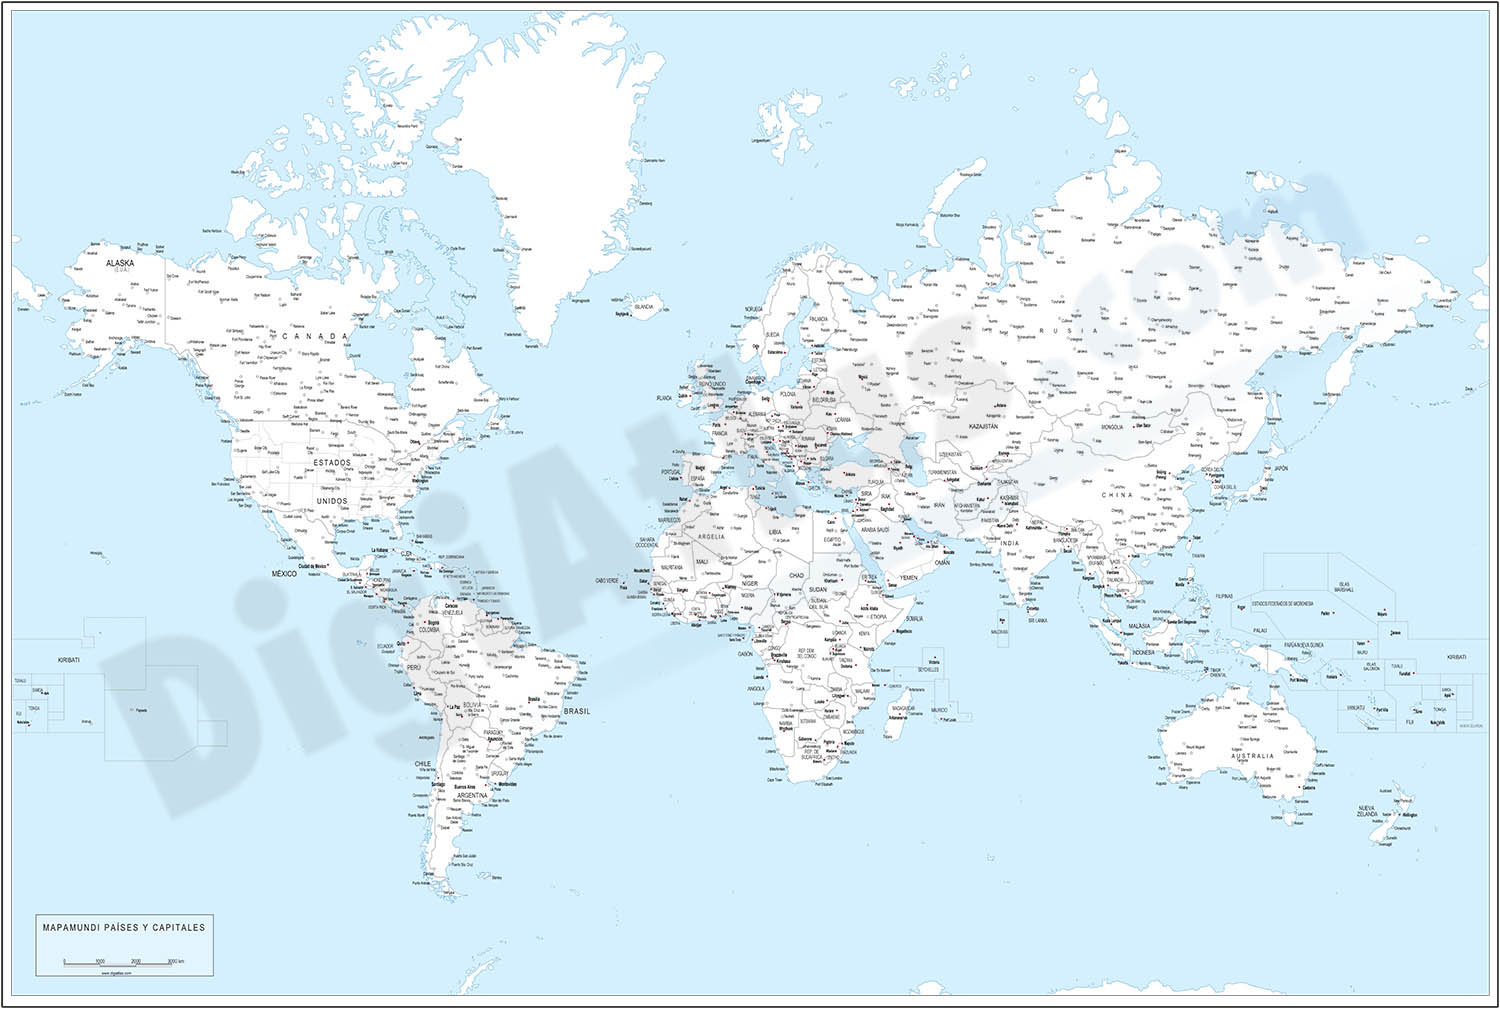 Worldmap - countries and capitals